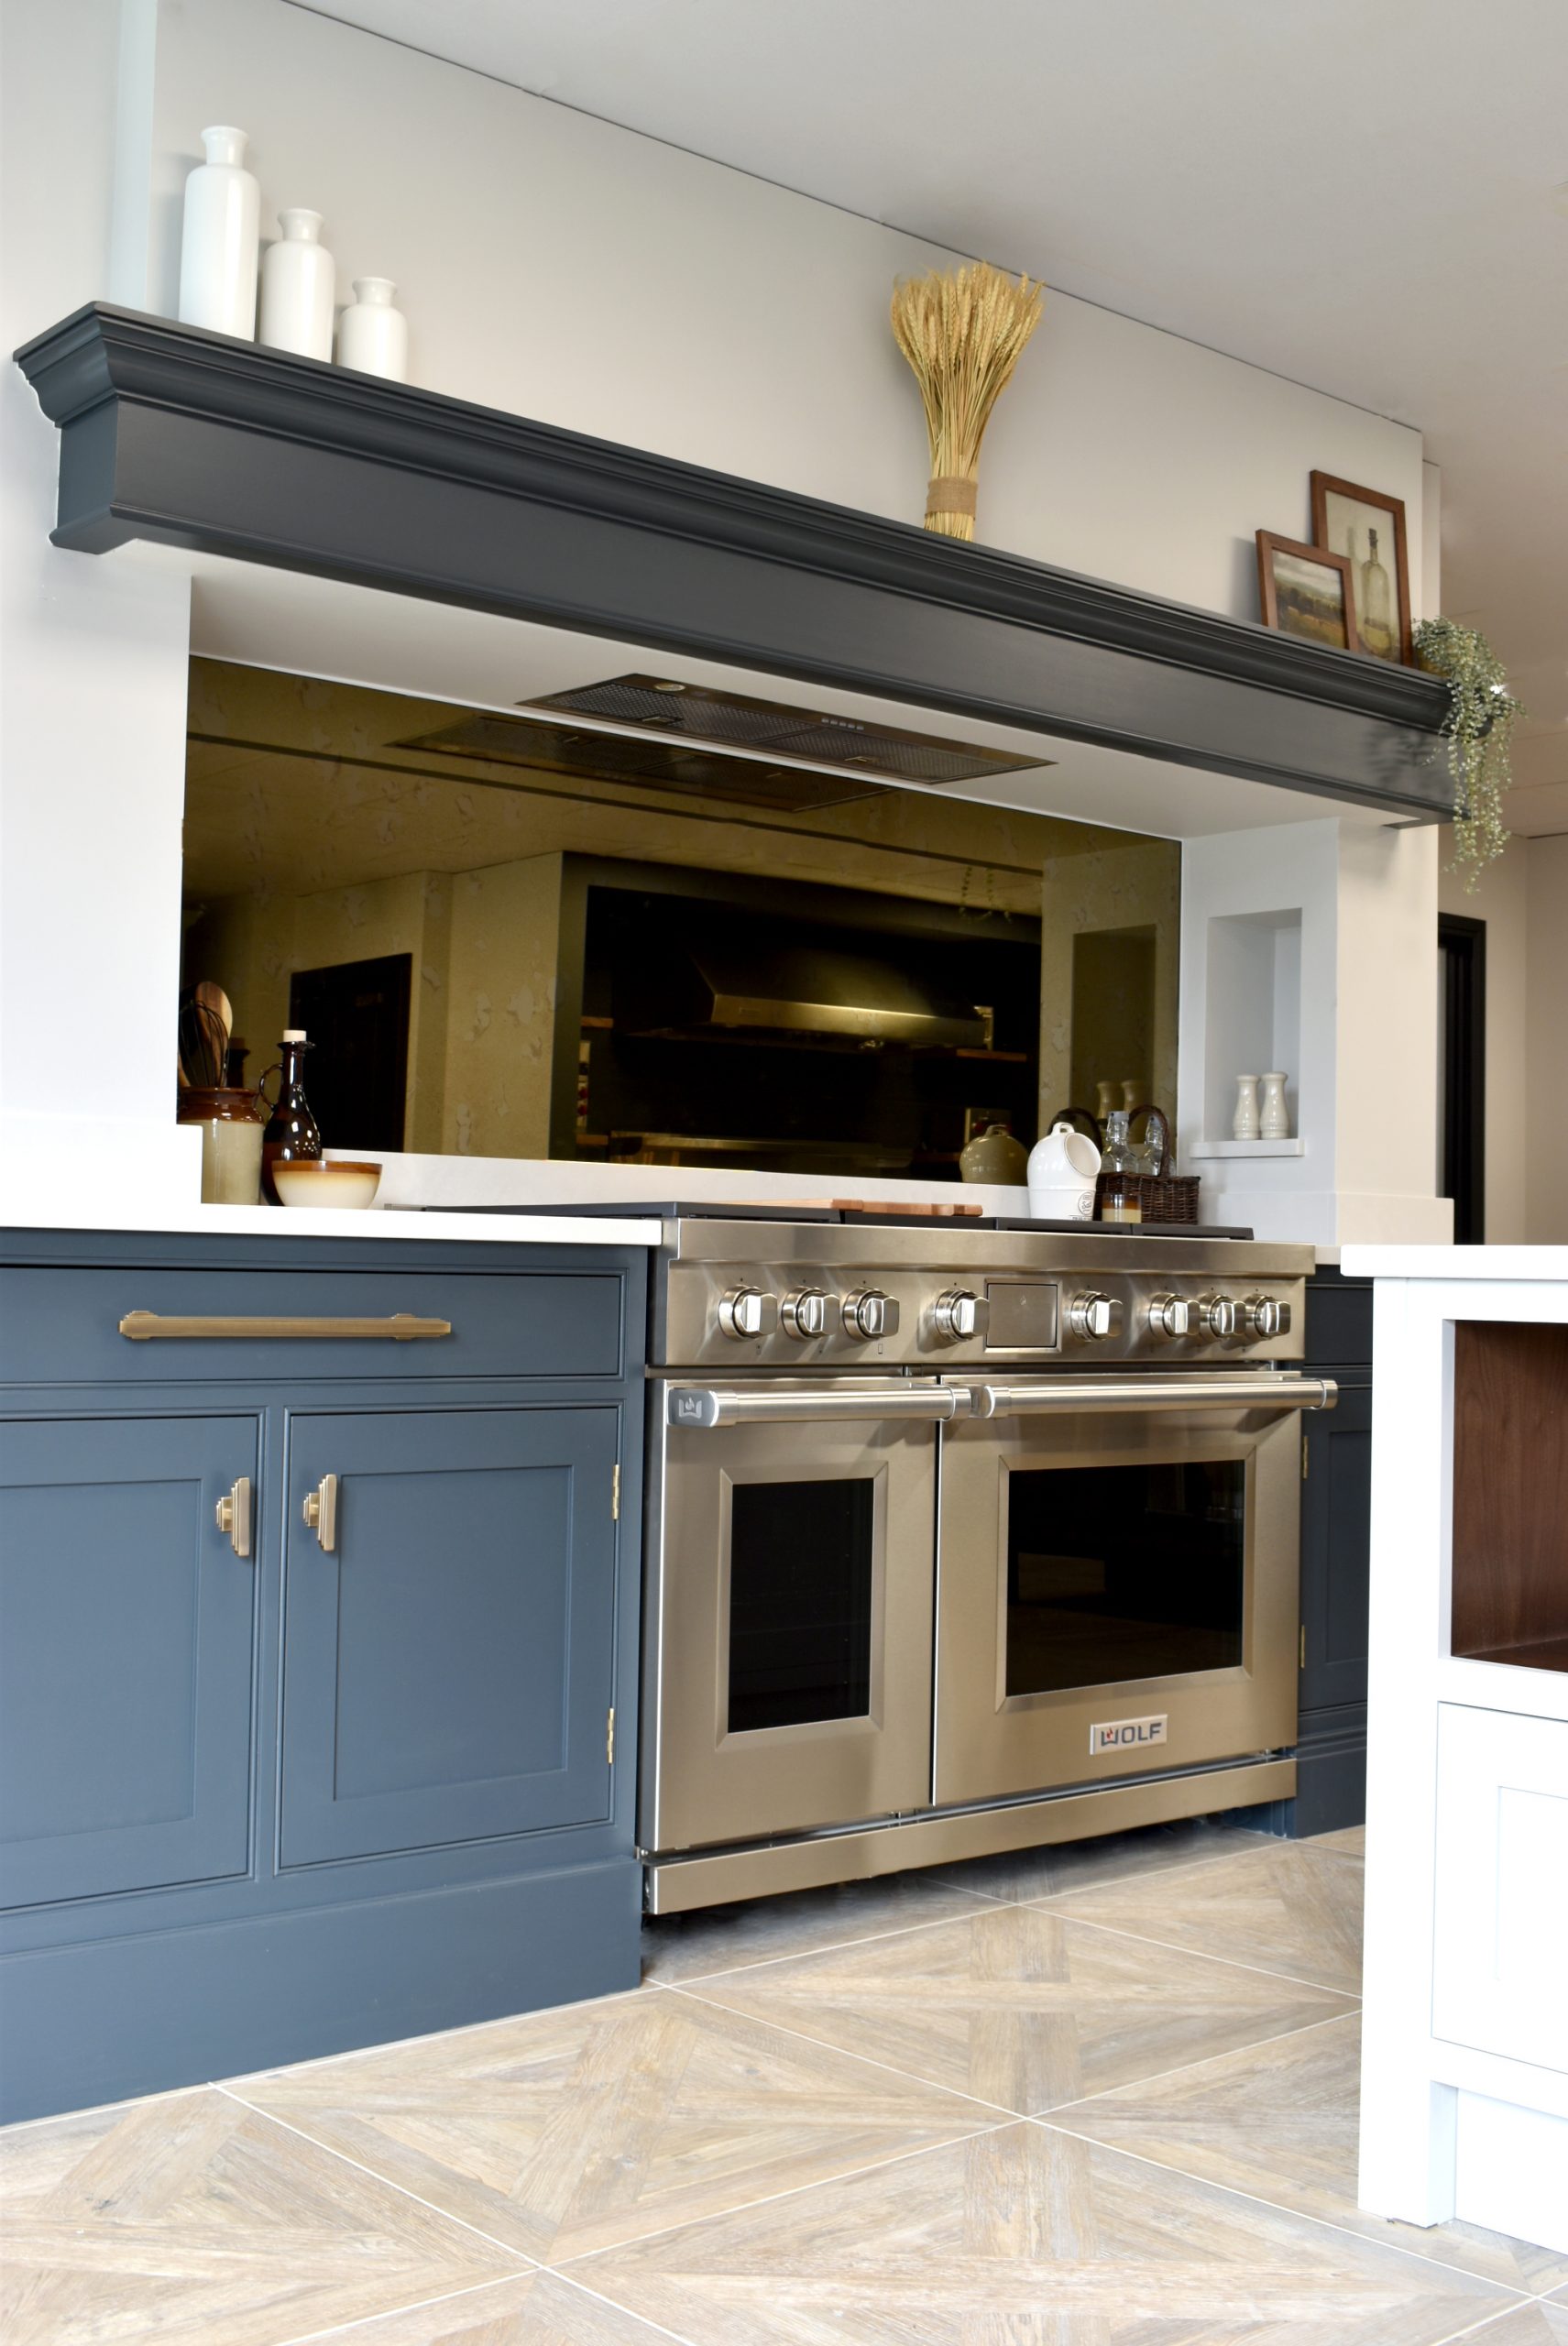 Wolf dual fuel range oven pictured in situ in a classic contemporary kitchen
